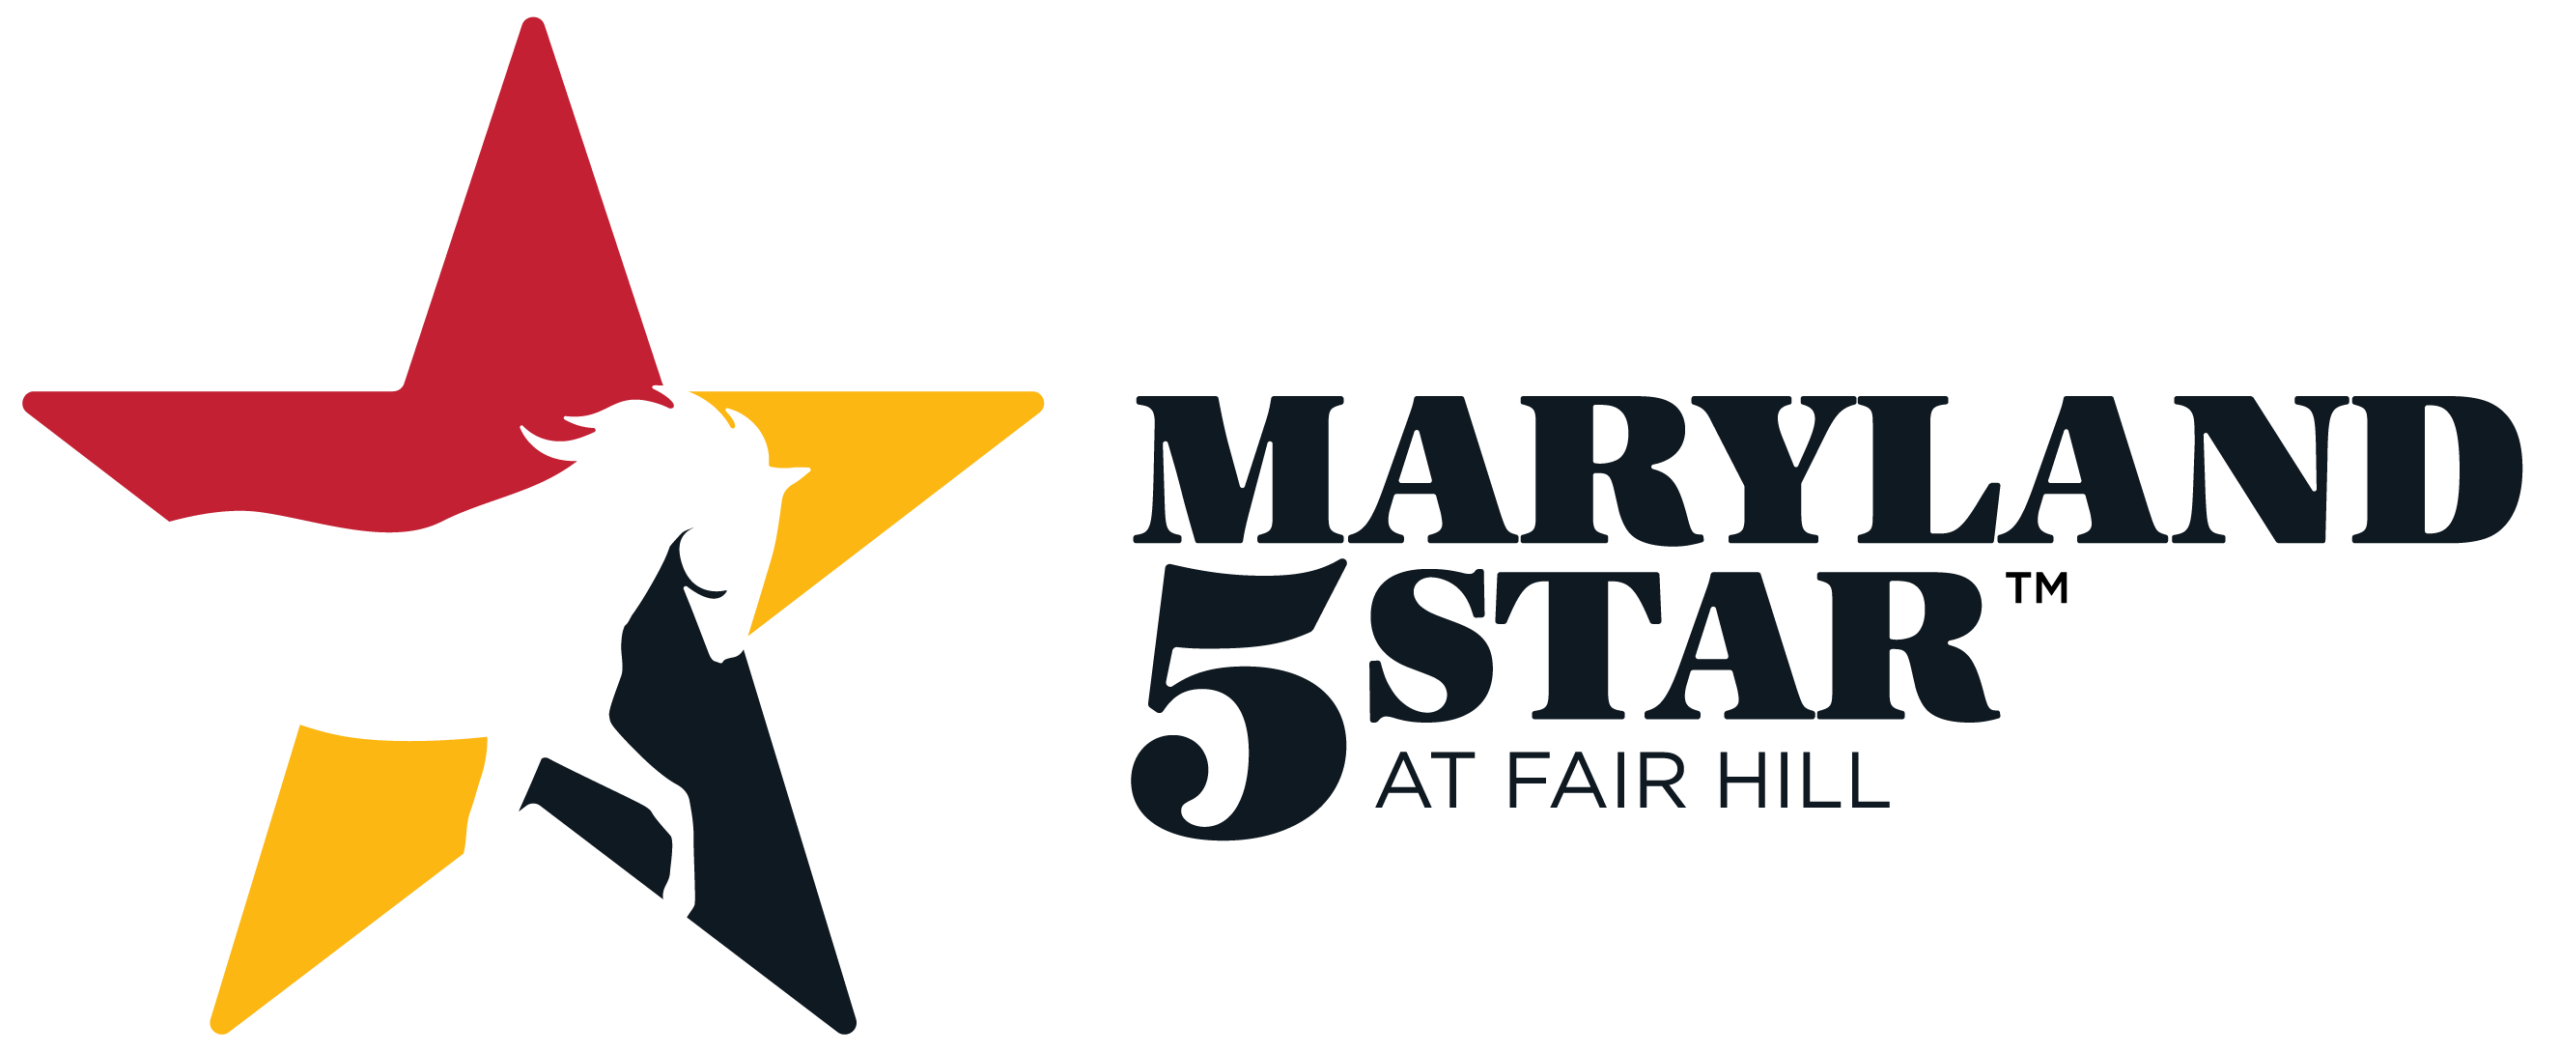 MARS Equestrian announced as supporter of which new 5 star event?